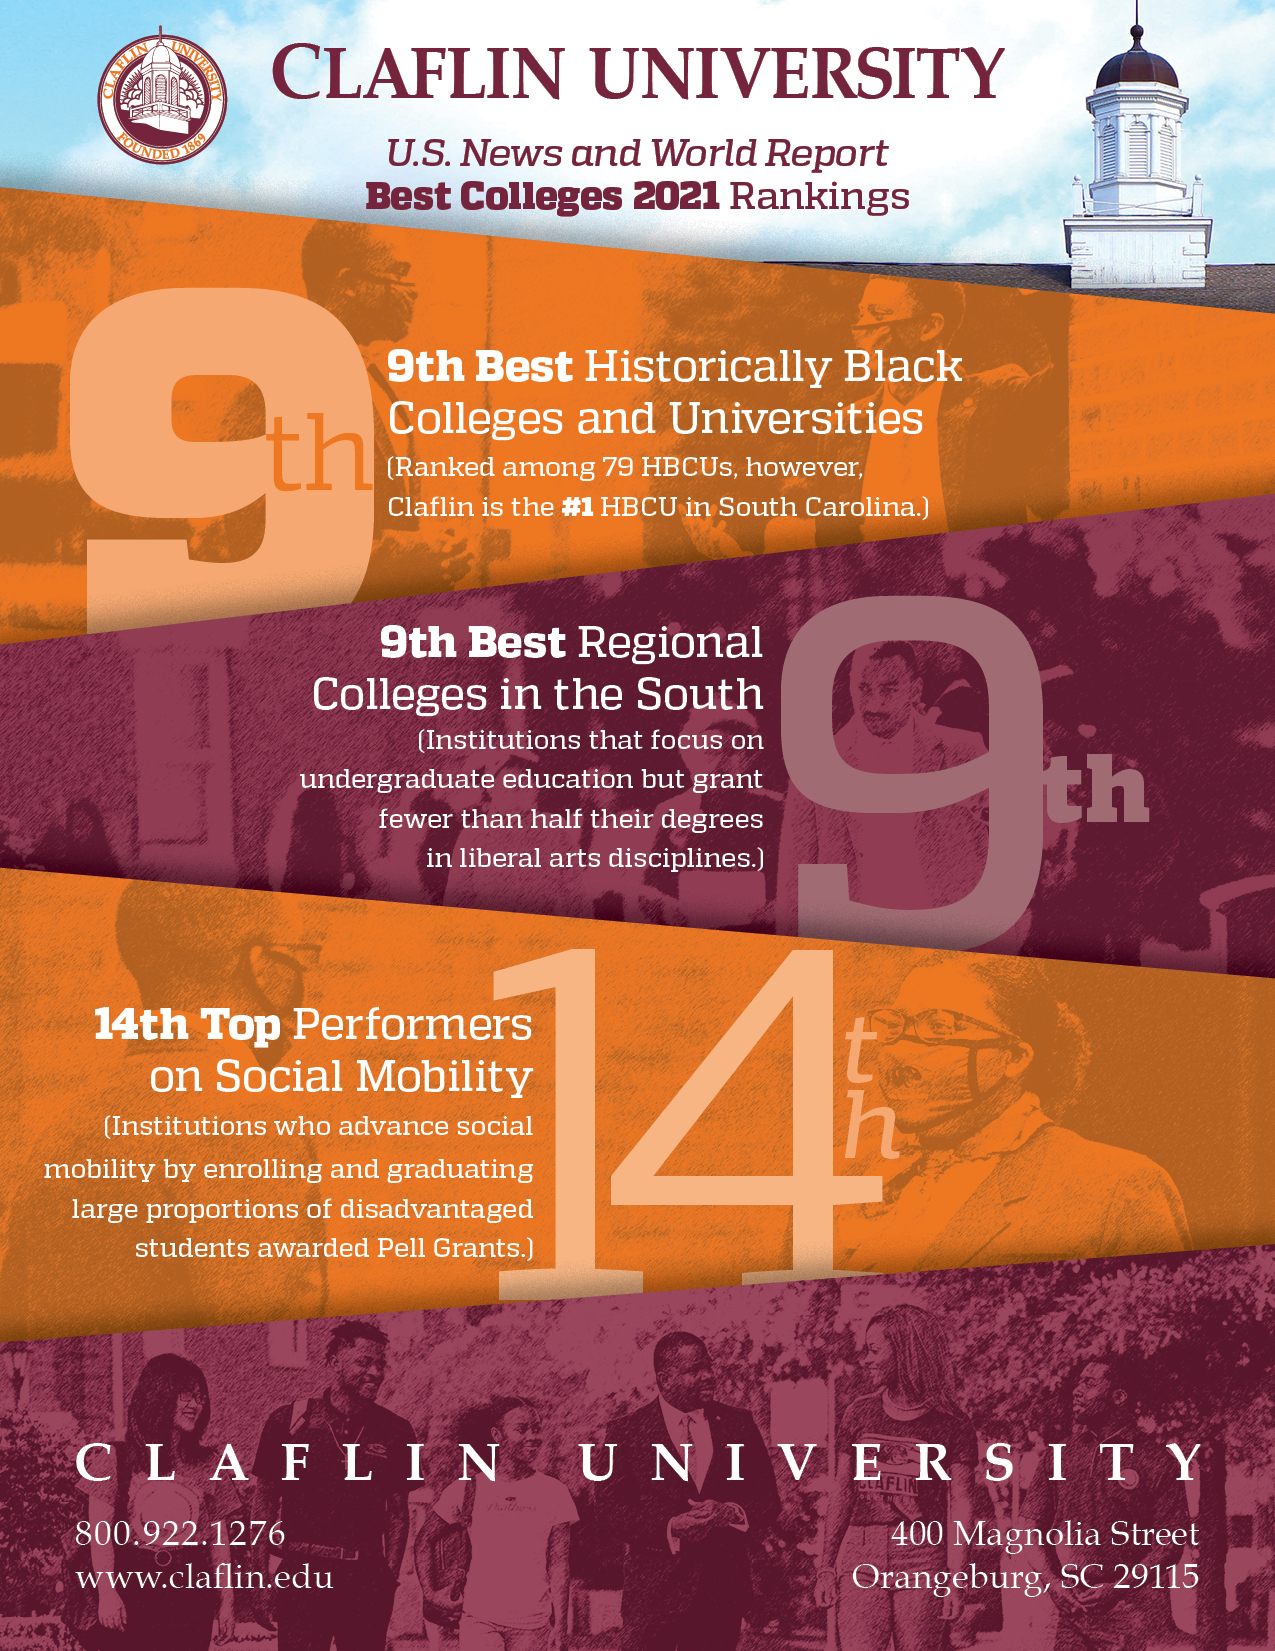 Claflin Ranked A Top 10 Hbcu And Top 10 Best Regional College In The South By U S News And World Report